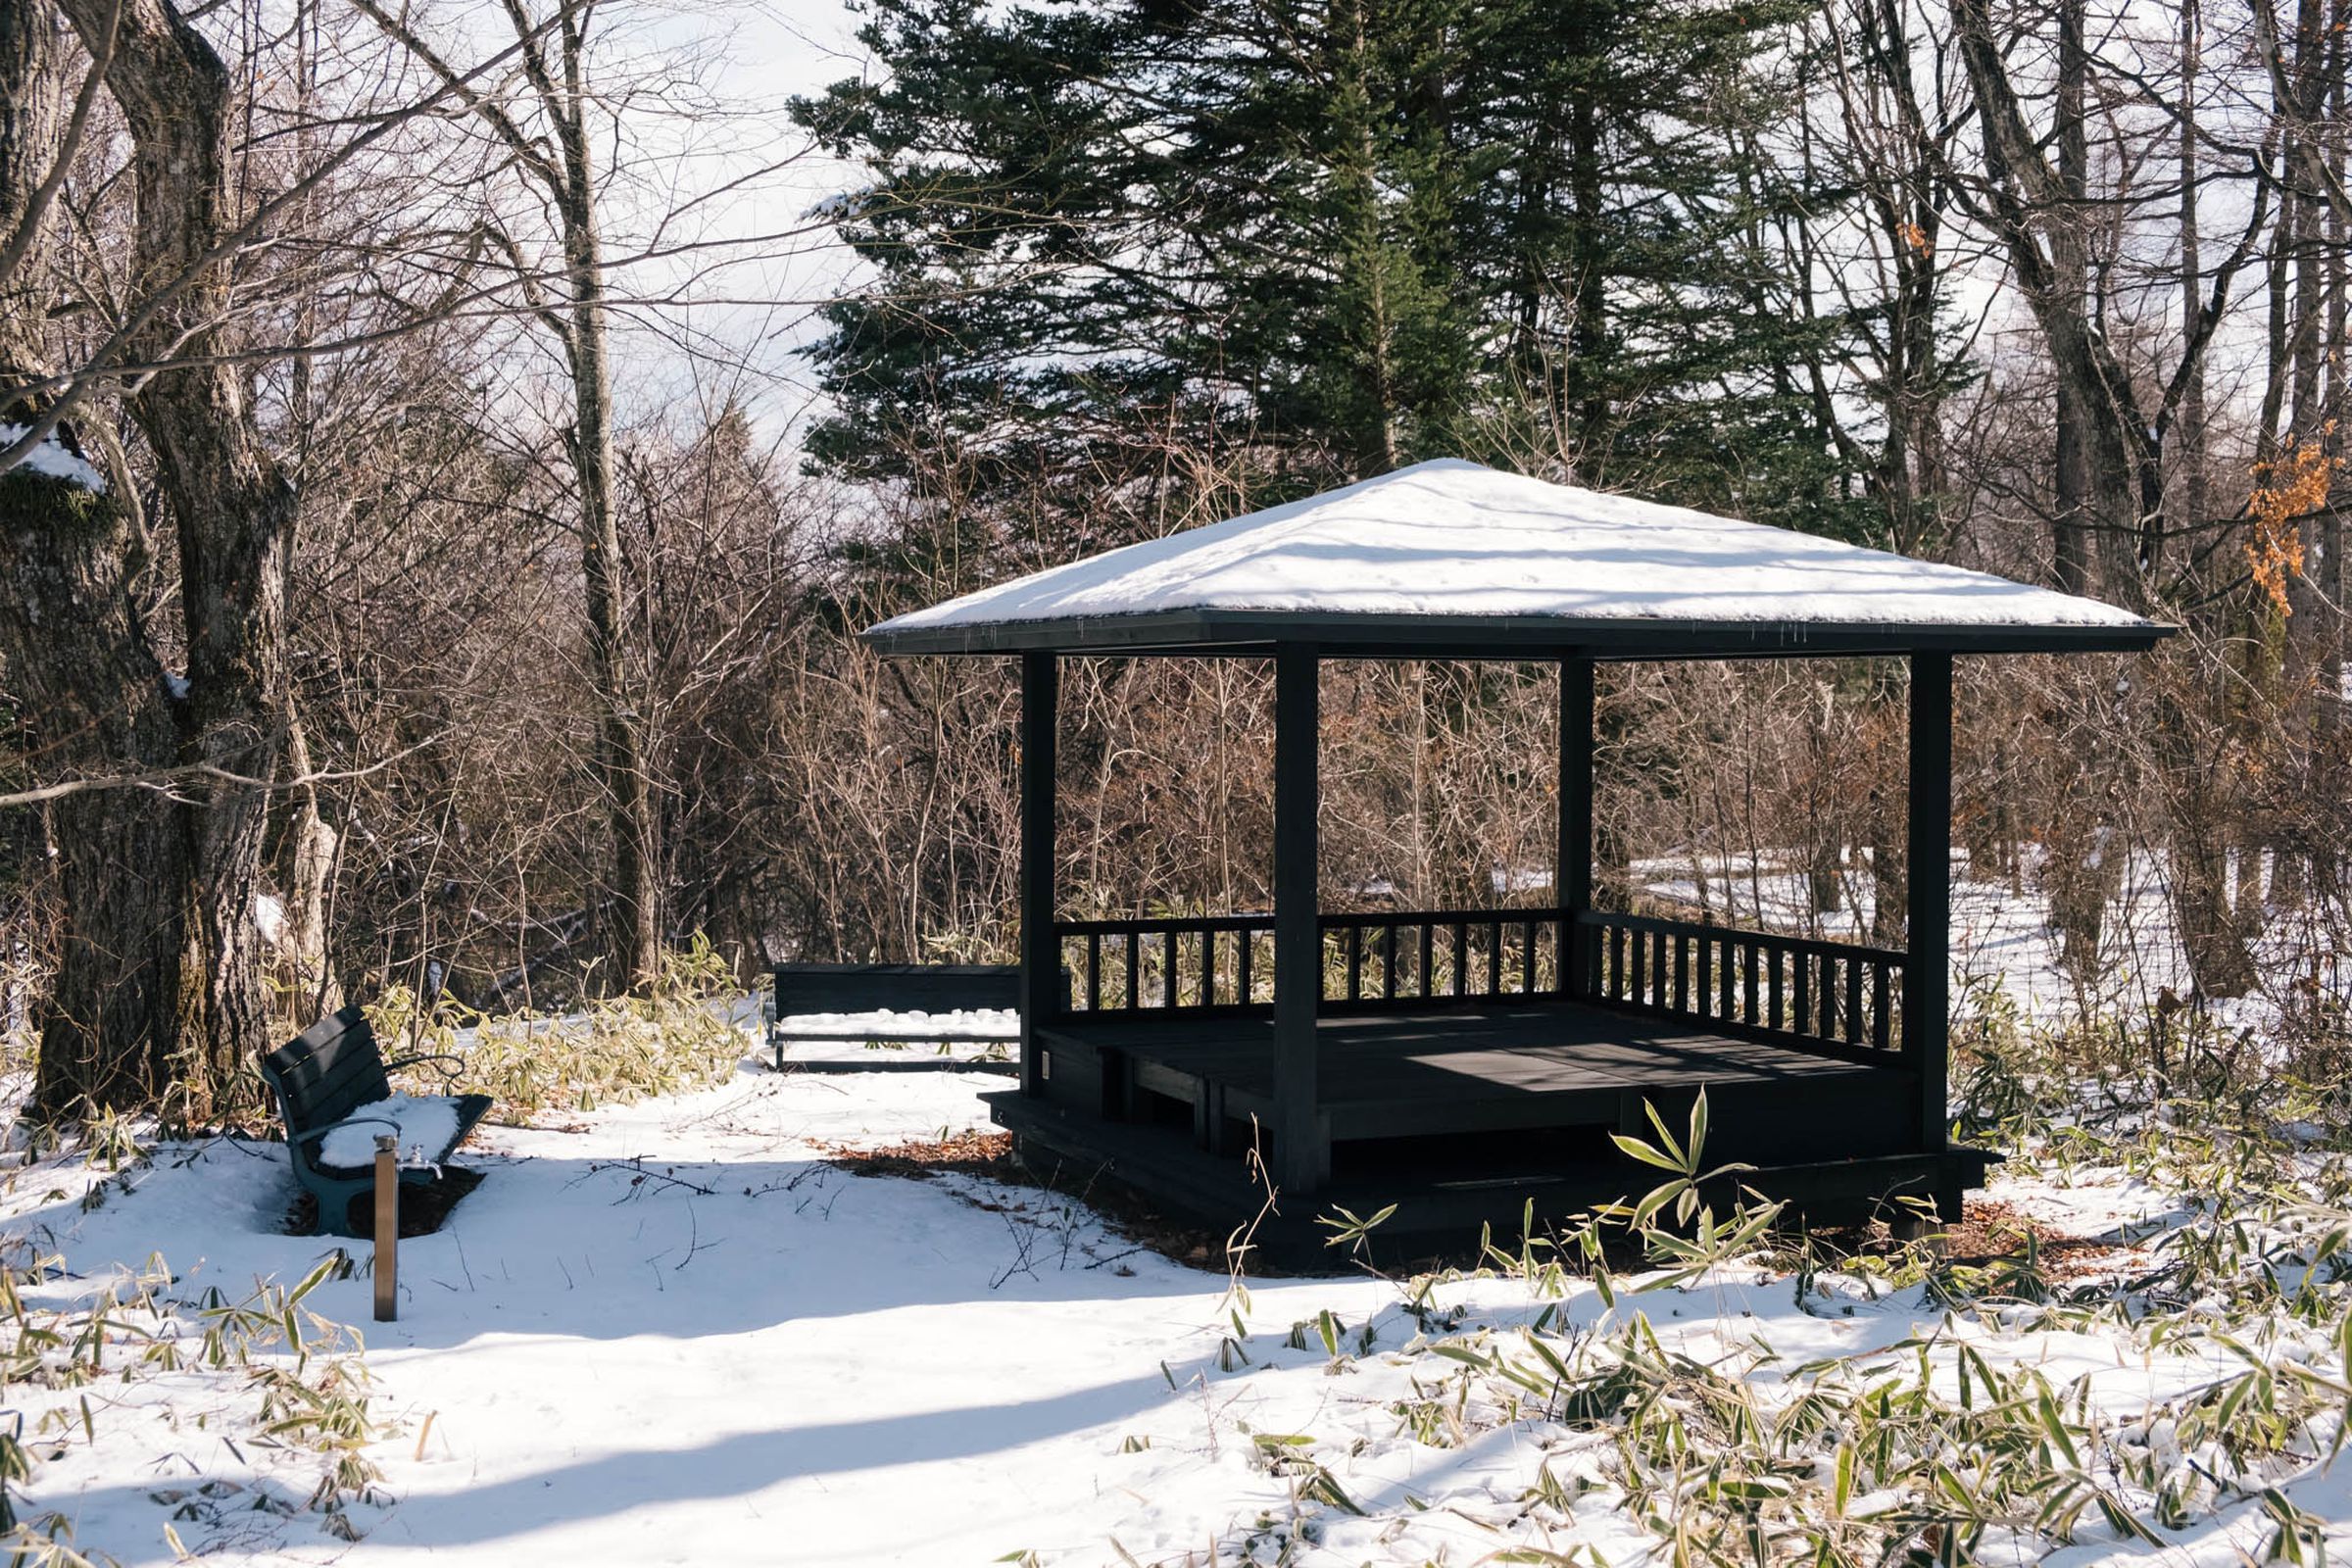 This gazebo hasn't gotten a lot of use so far. Probably because it is super cold in Karuizawa.